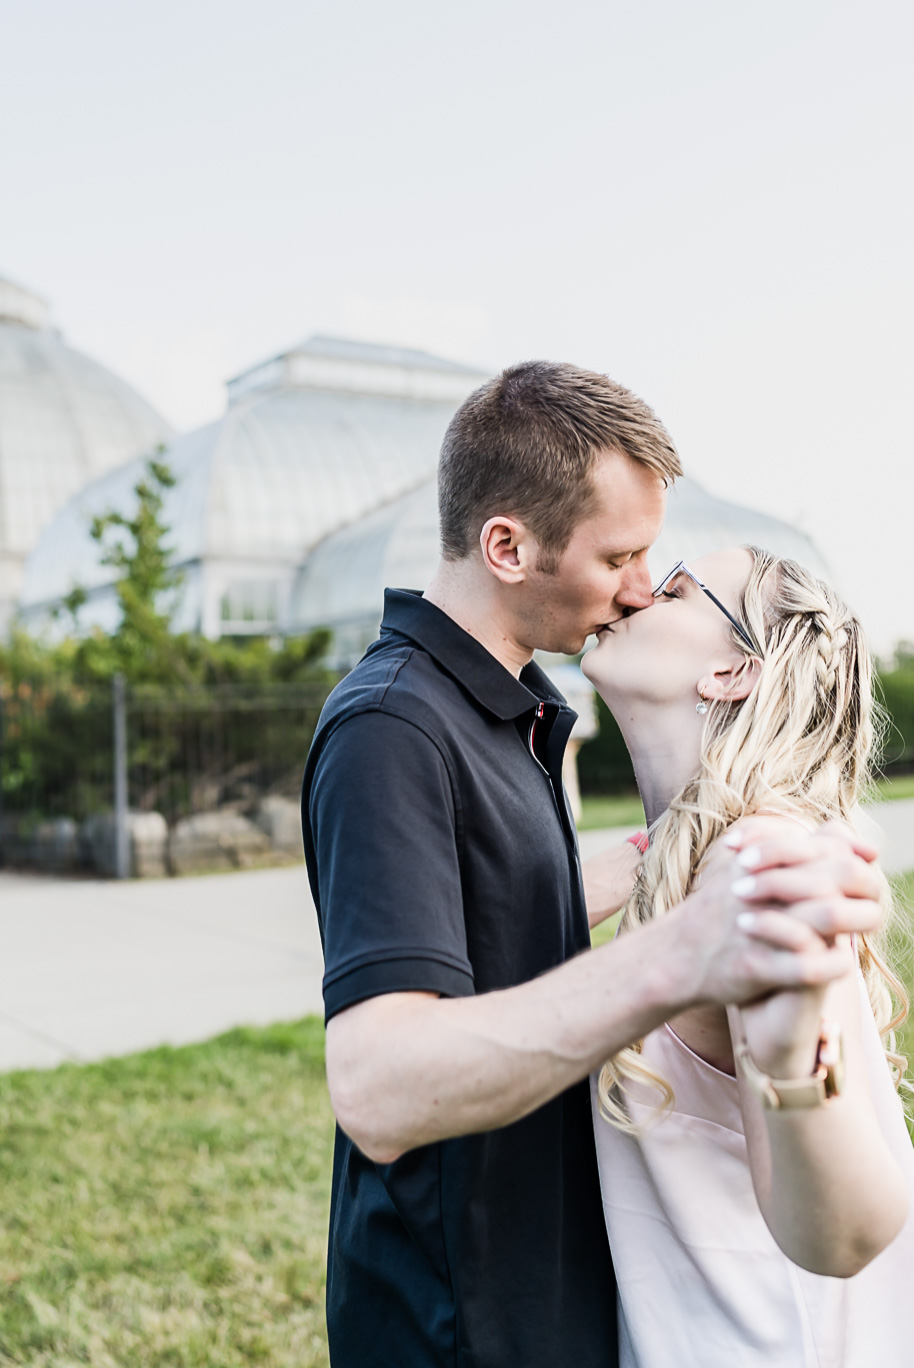 Romantic summer Belle Isle engagement photos in Detroit, Michigan provided by Kari Dawson top-rated Detroit wedding photographer.